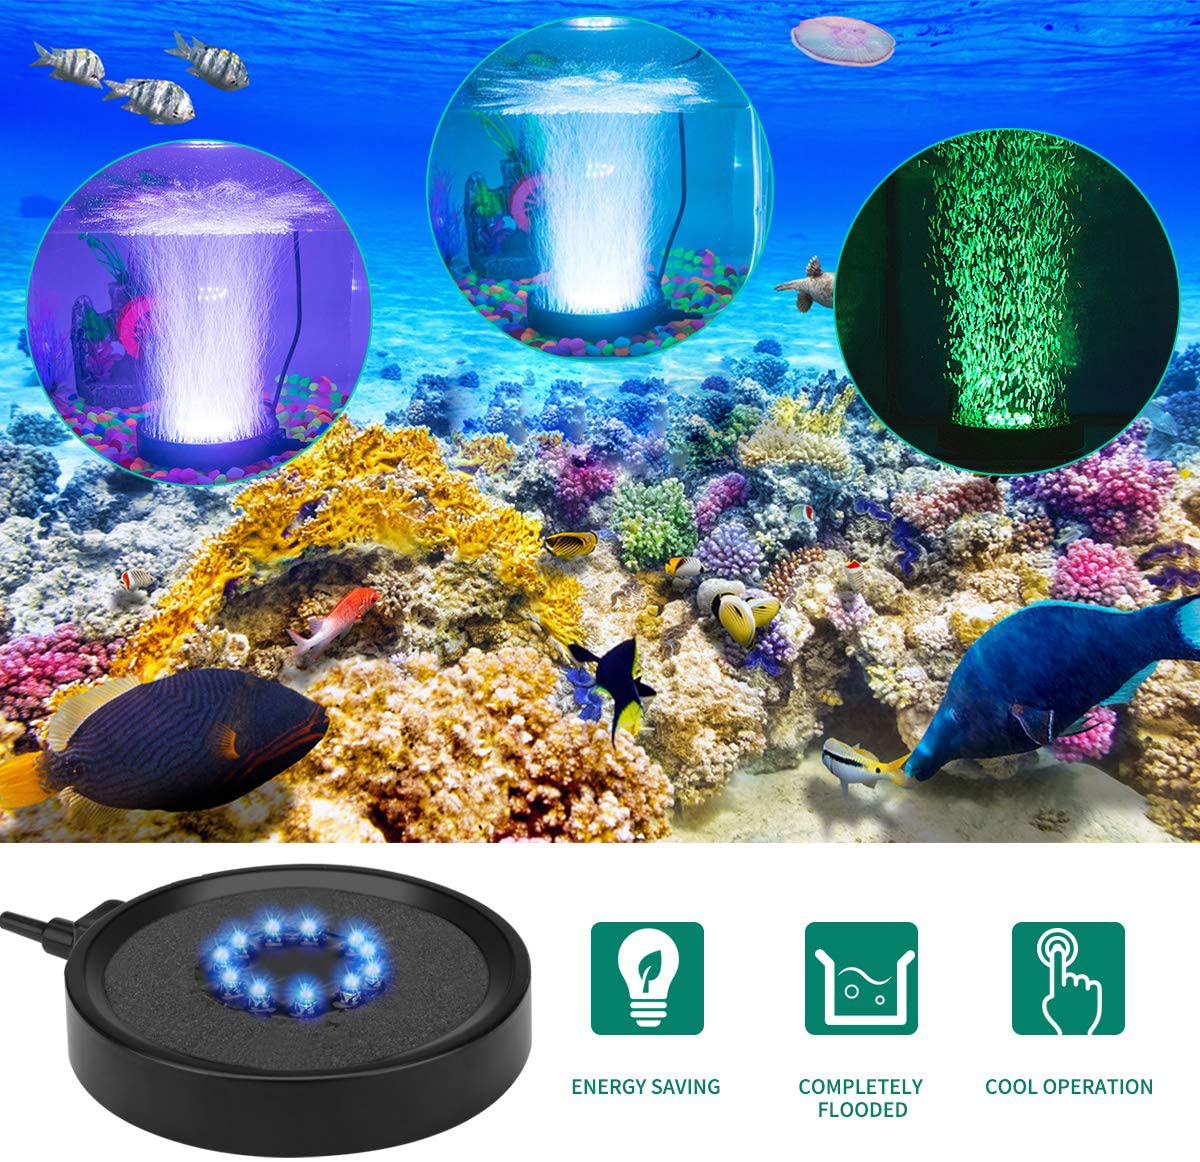 Number-One Aquarium Bubble Light LED Fish Tank Bubbler Light, Remote Controlled Aquariums Air Stone Disk Lamp with 16 Color Changing, 4 Lighting Effects for Fish Tanks and Fish Ponds